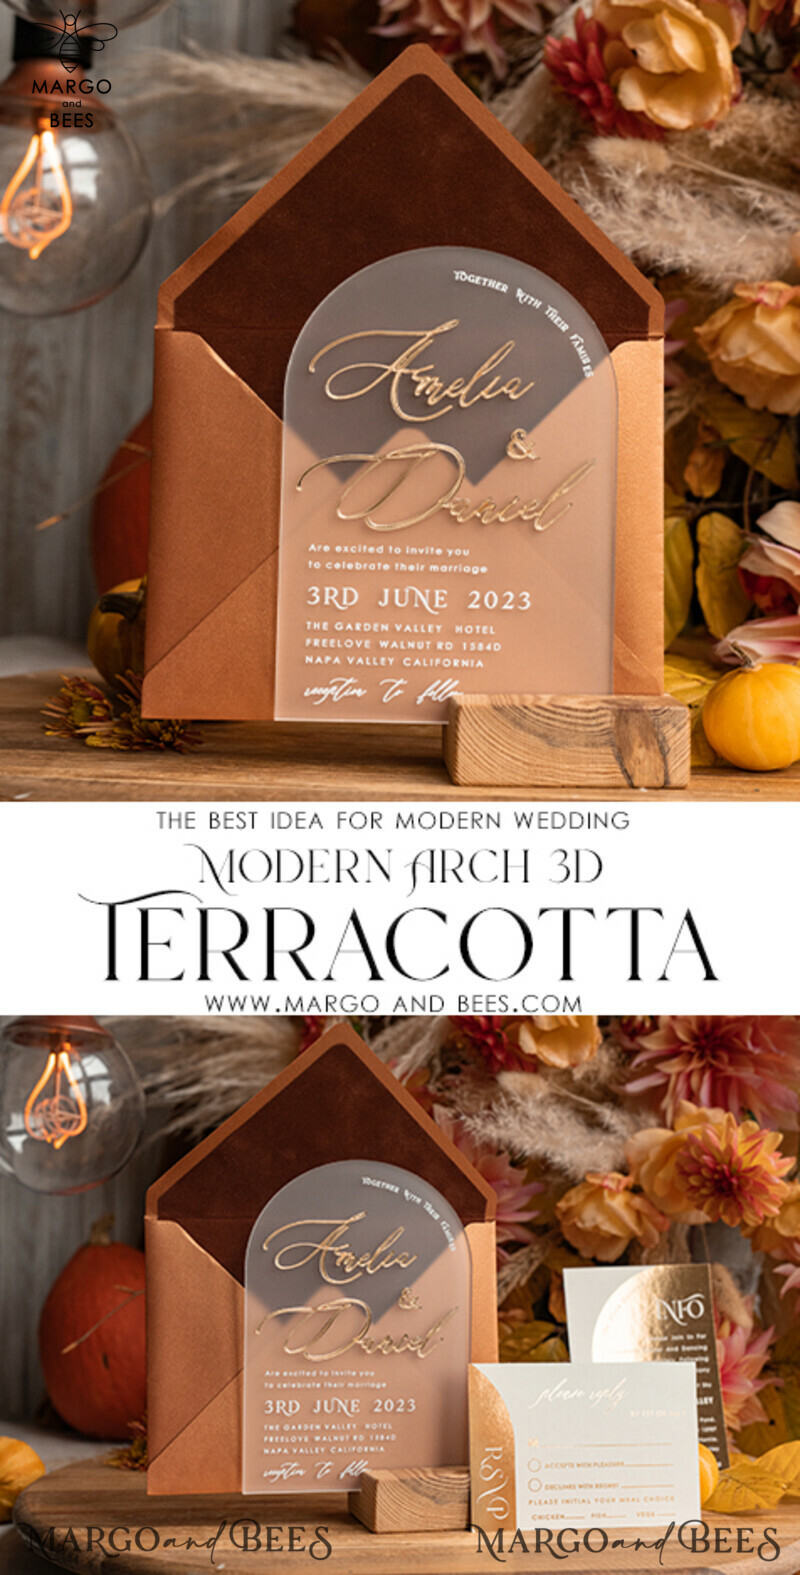 Elegant Fall Terracotta Modern Arch 3D Wedding Invitation Suite with Bespoke Frozen Acrylic Gold Touches
Luxury Velvet Wedding Invitations with Frosted Plexi Glass and Golden Names
Glamour Wedding Invitation Suite featuring 3D Gold Mirror and Fall Copper Invites
Exquisite Wedding Cards: A Perfect Blend of Style and Sophistication-3